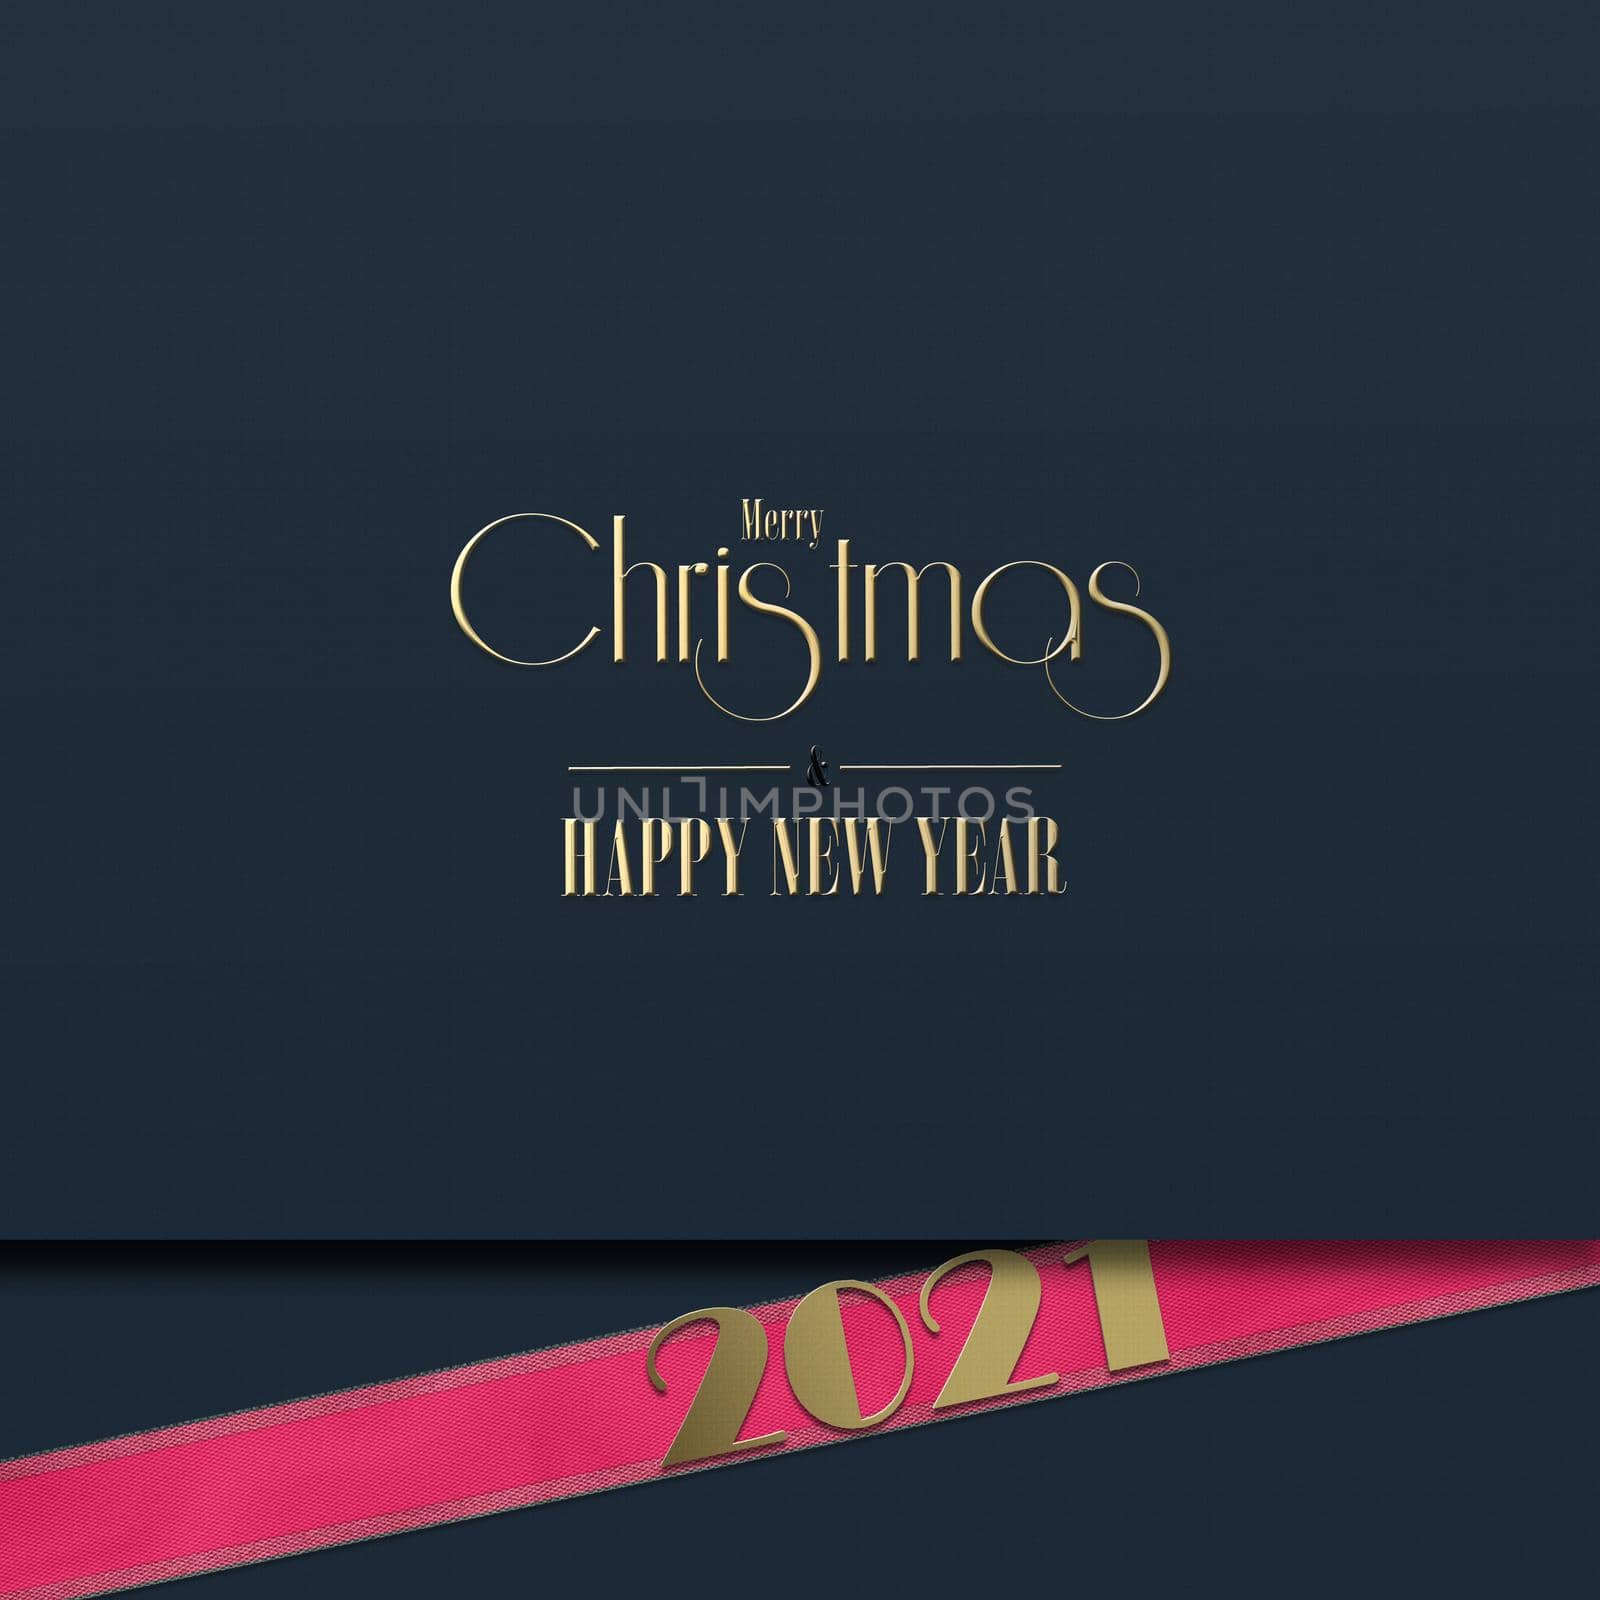 Beautiful elegant Christmas holiday 2021 card with pink ribbon and gold digit 2021 on dark blue black background. 3D rendering. Gold text Merry Christmas Happy New Year. Luxury holiday card